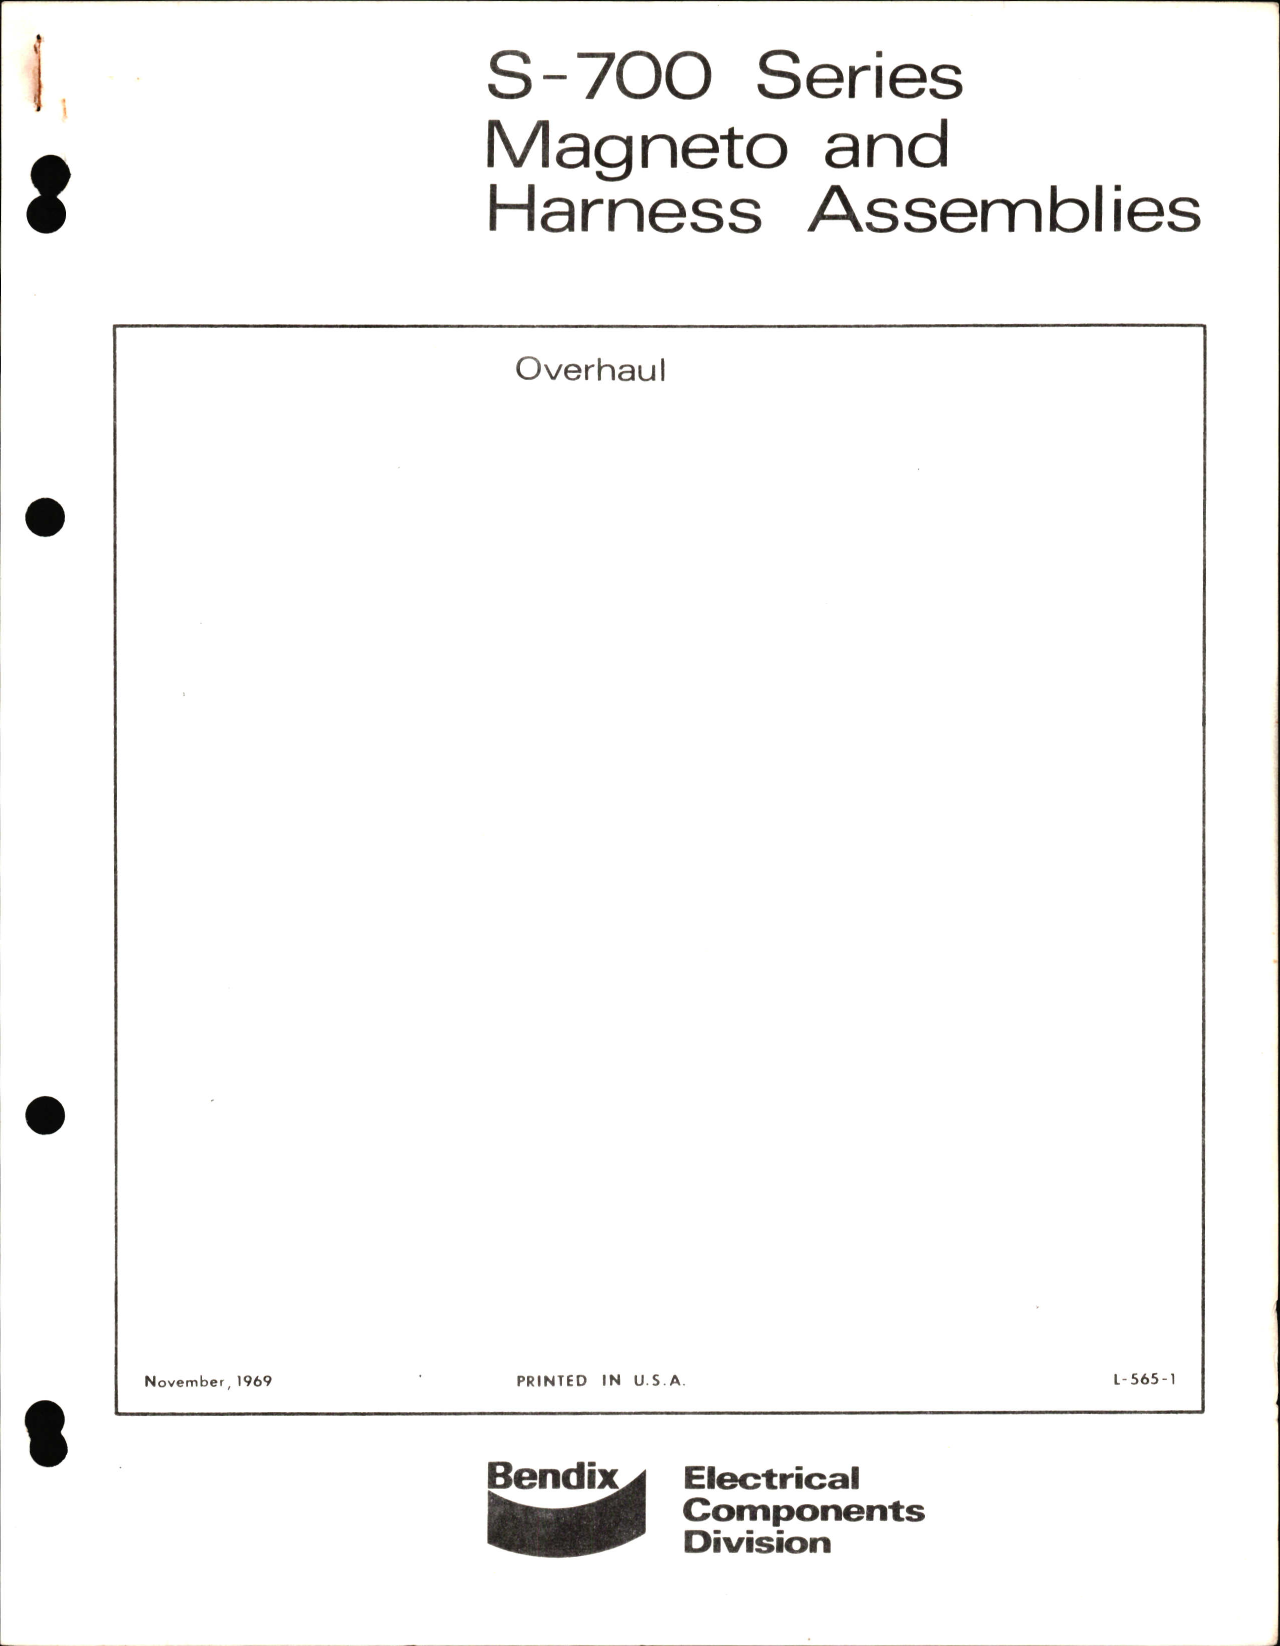 Sample page 1 from AirCorps Library document: Overhaul Instructions for S-700 Series Magneto and Harness Assemblies